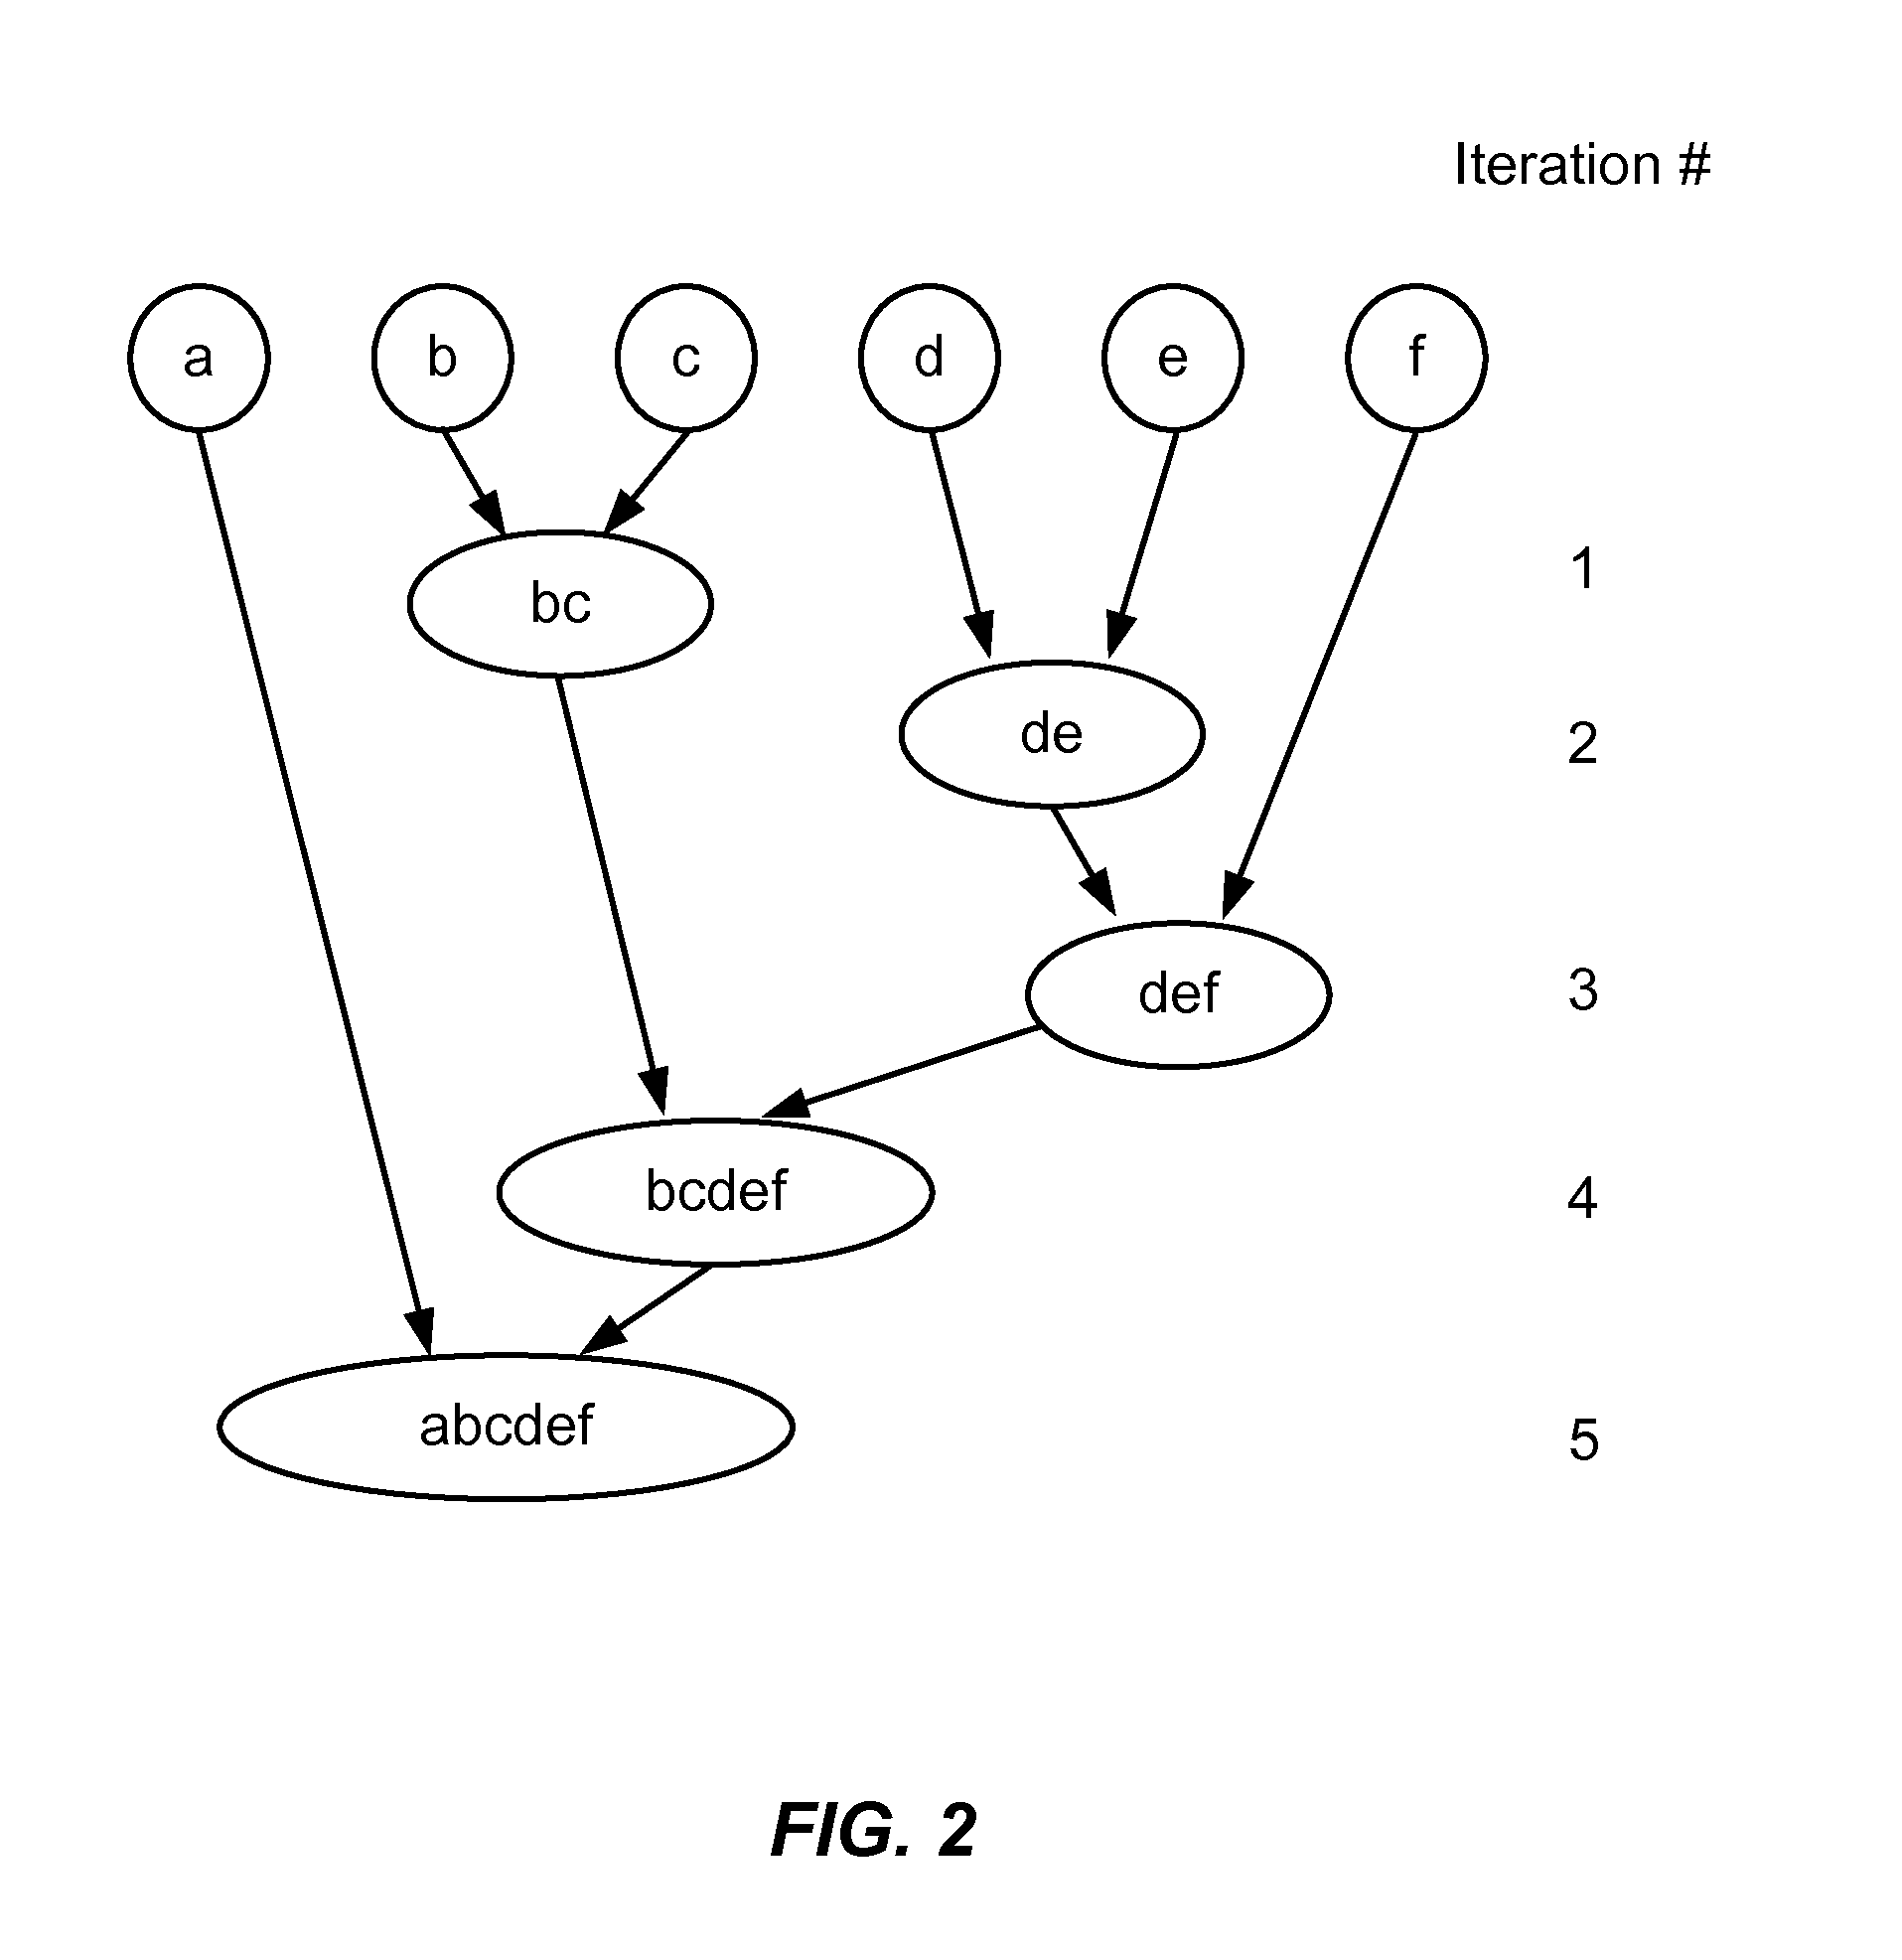 Method and system for clustering transactions in a fraud detection system